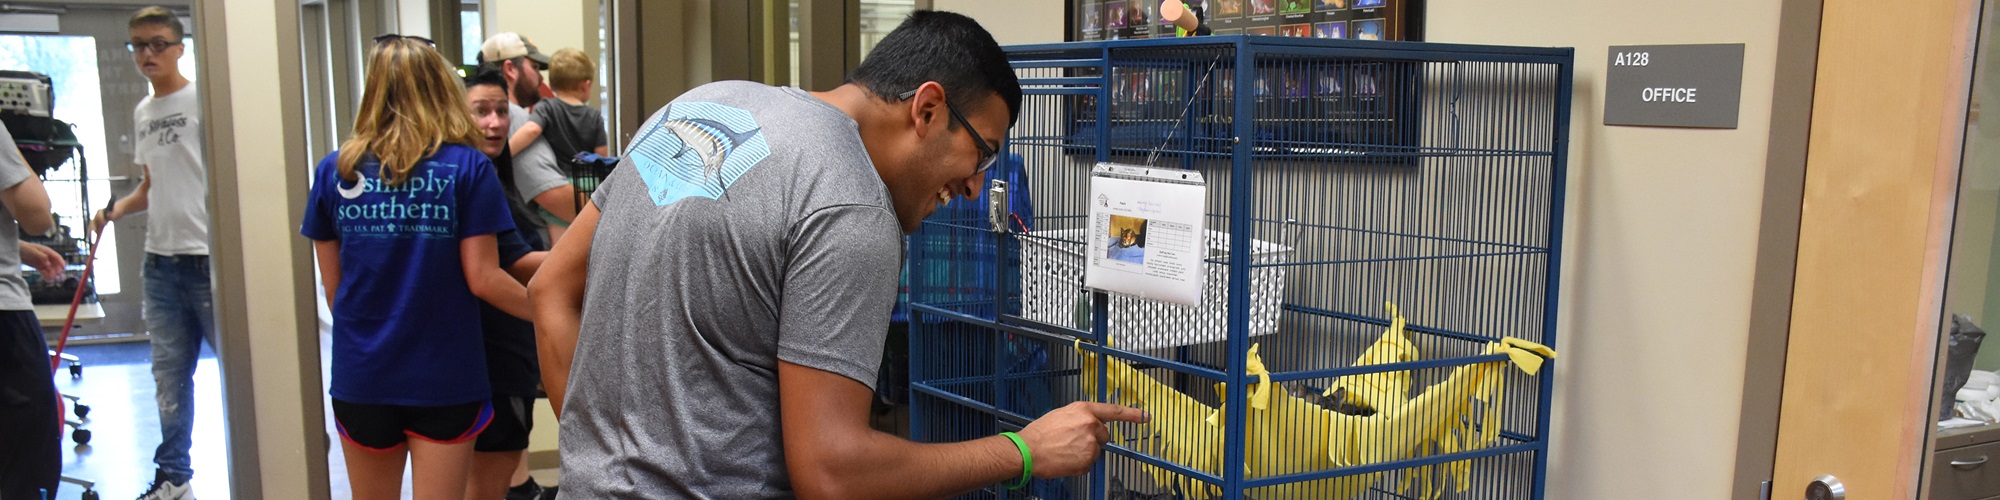 Visitors at the Animal Care & Adoption Center